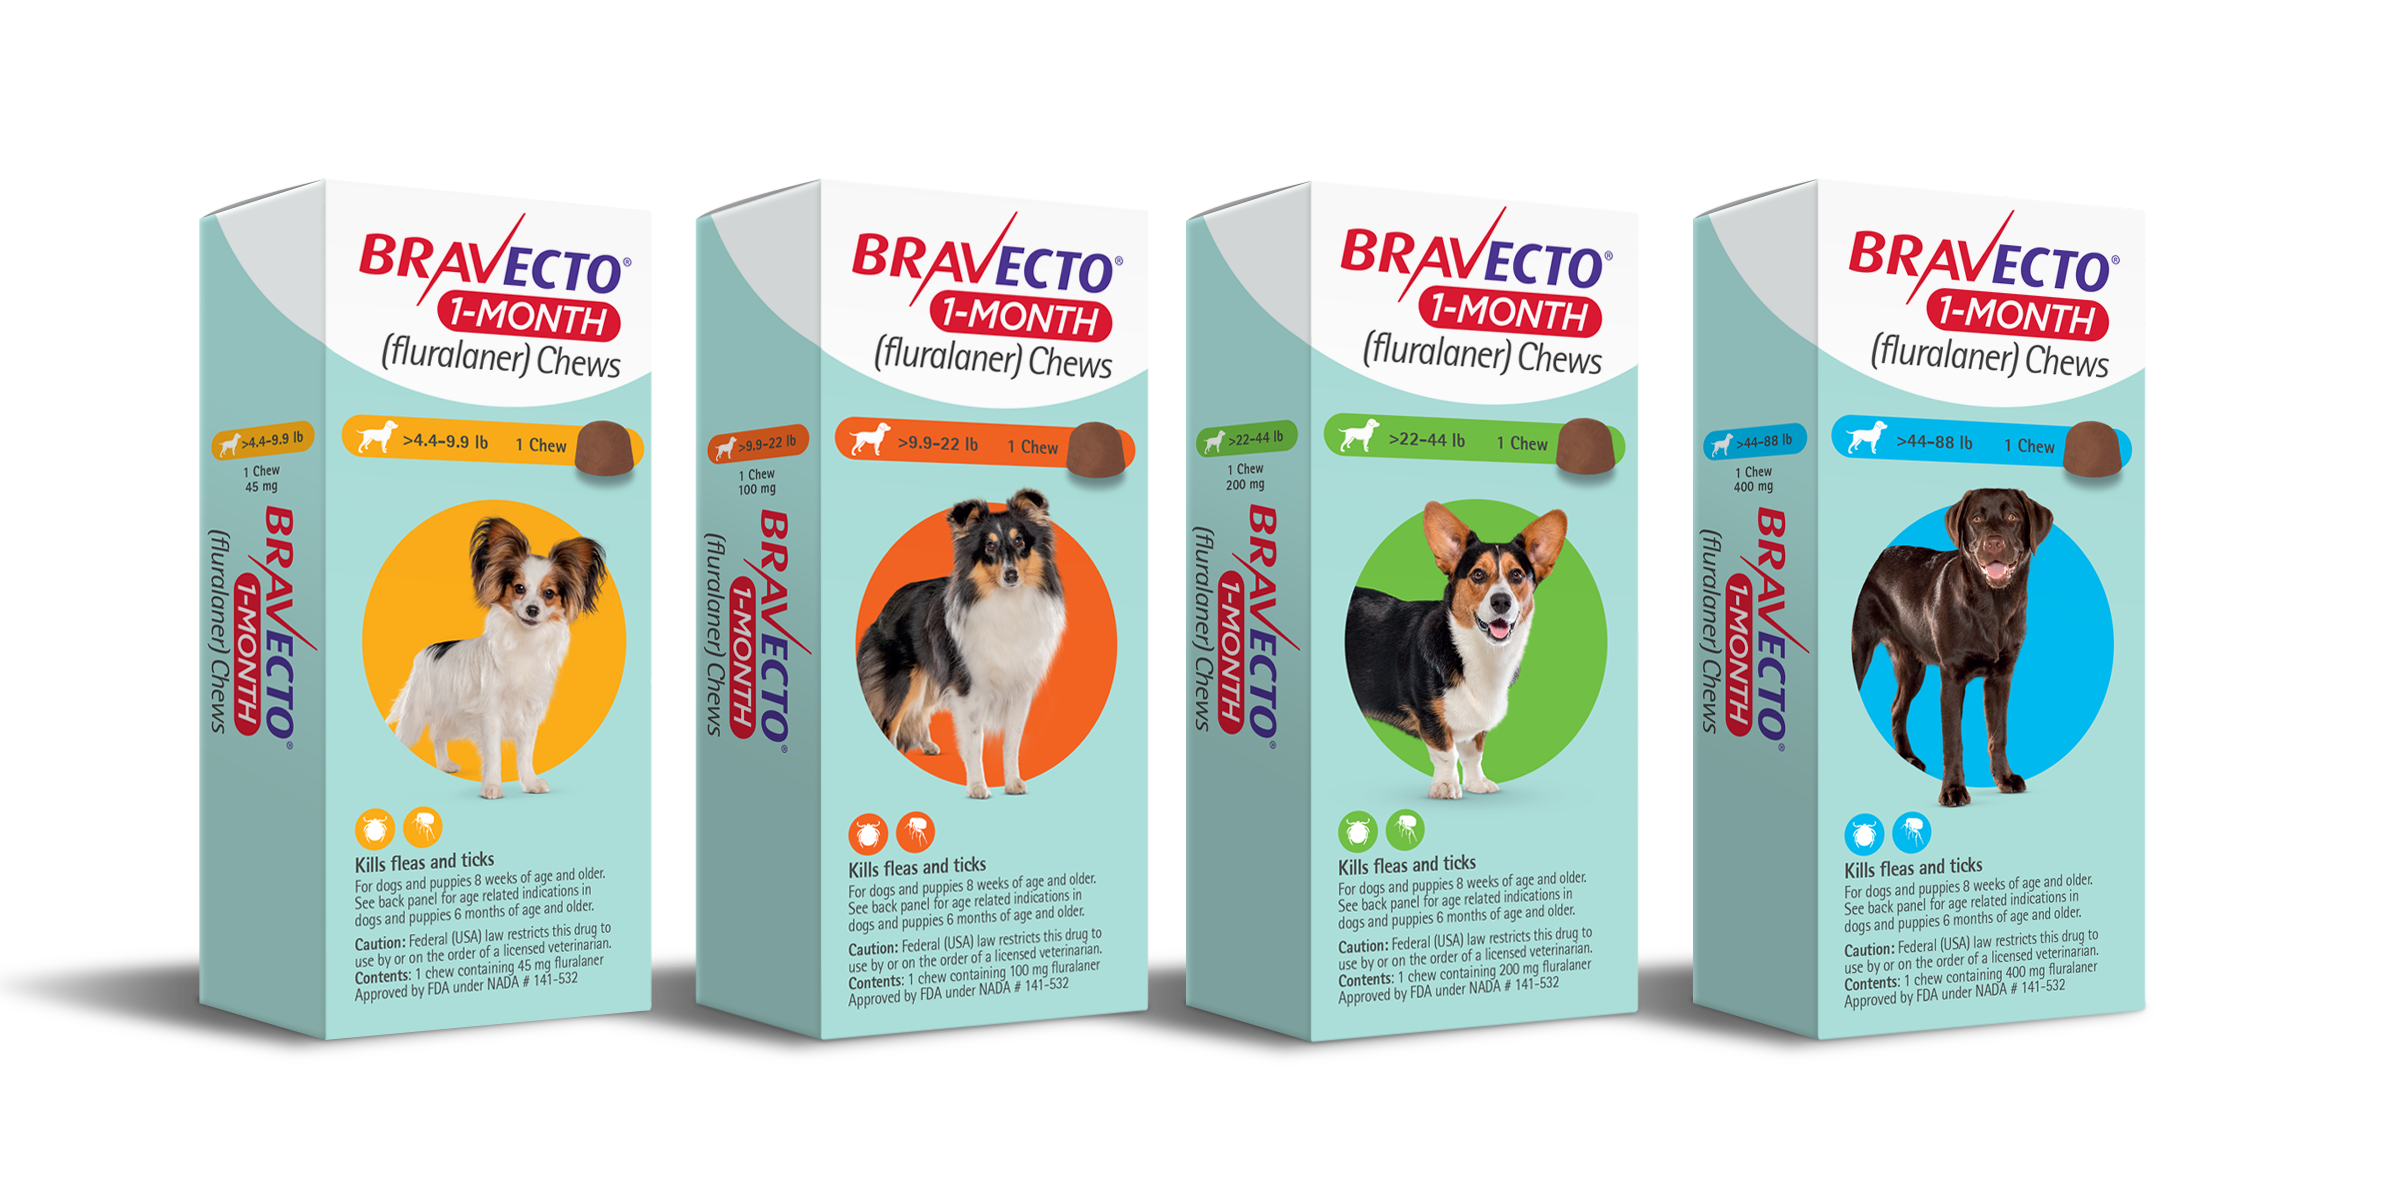 BRAVECTO® 1-MONTH Chews for Dogs and Puppies | Merck Animal Health USA